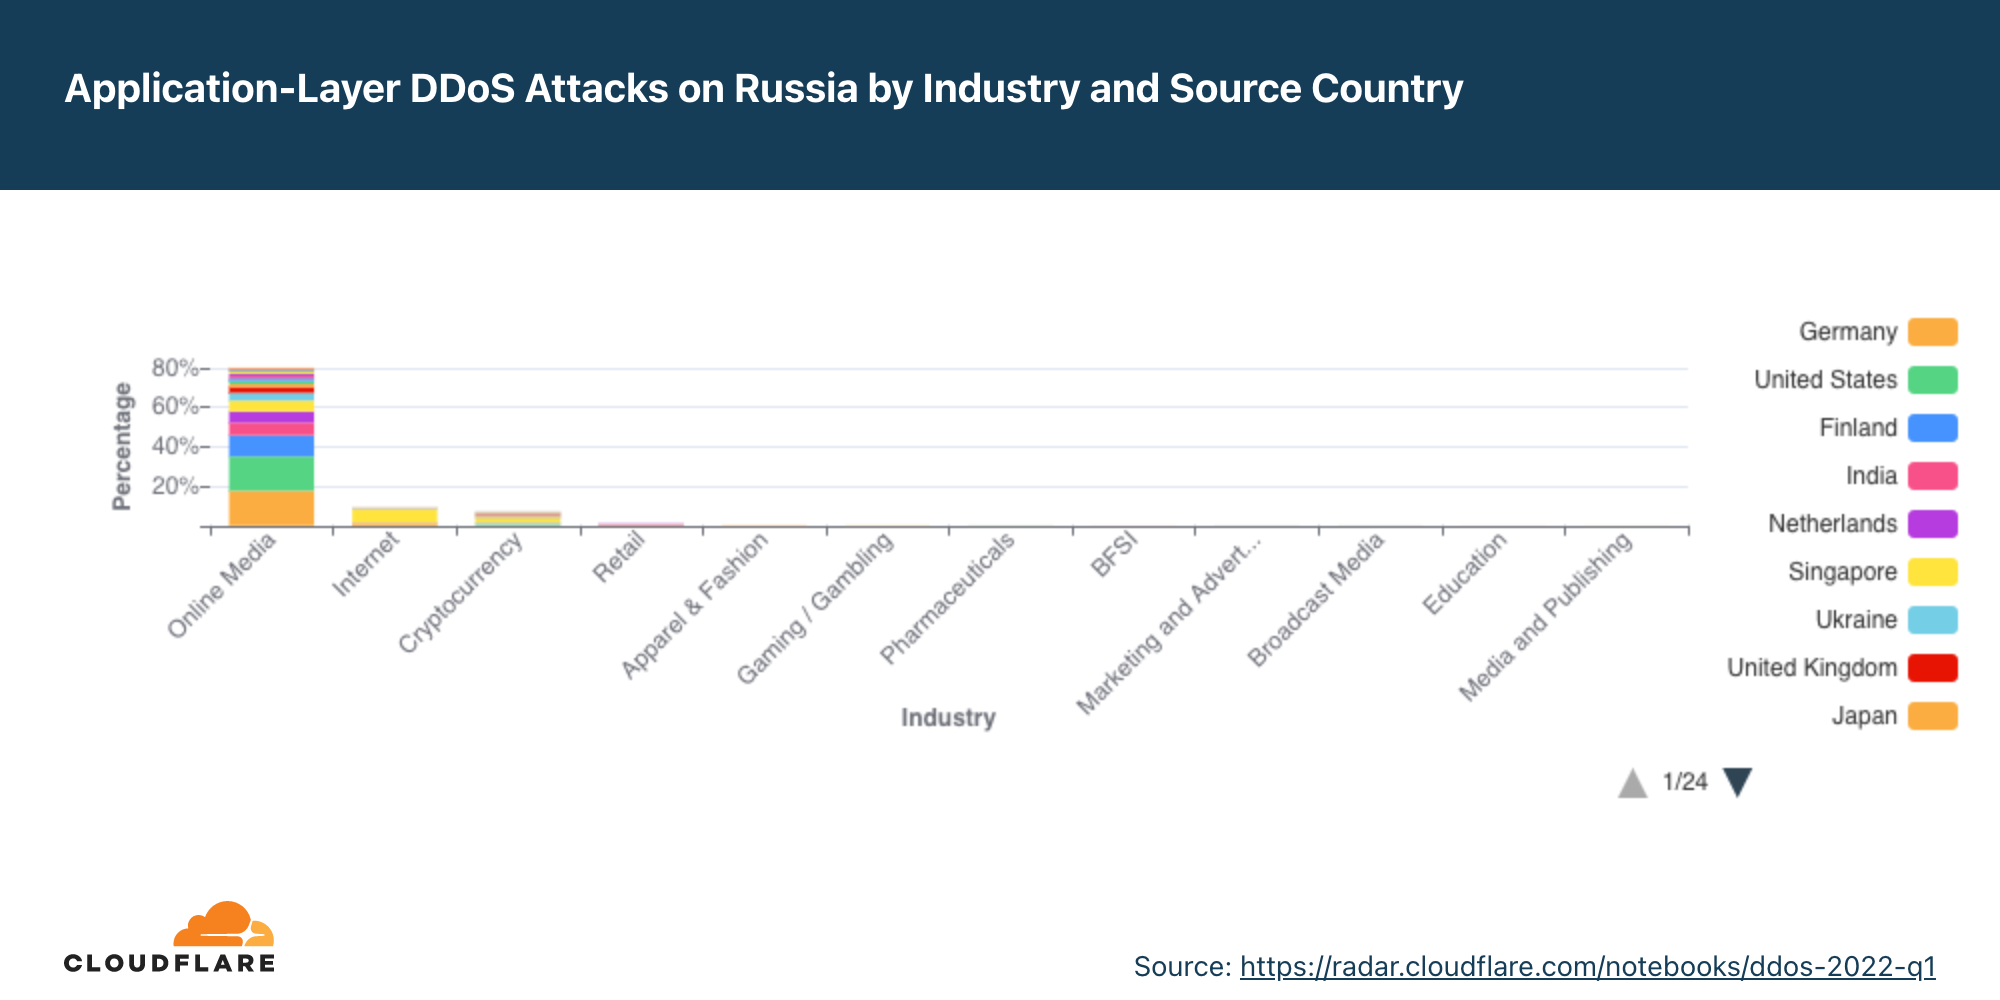 Graph of the distribution of HTTP DDoS attacks on Russian industries by source country in 2022 Q1